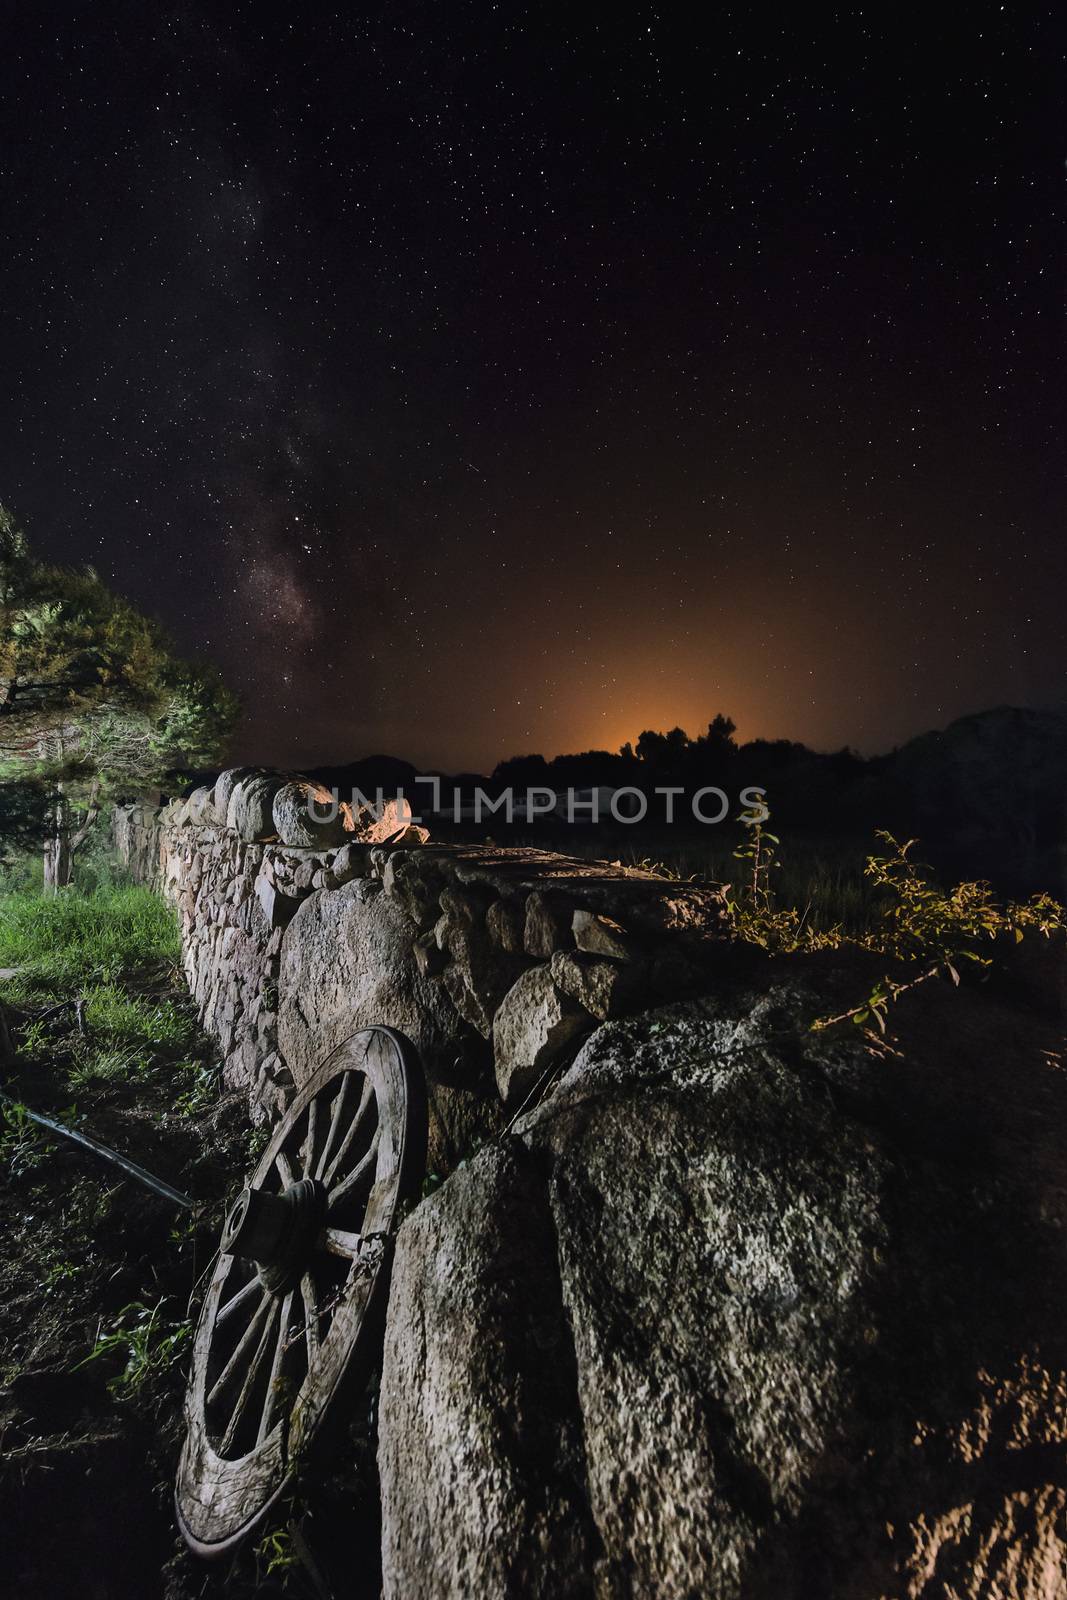 A wagon wheel is supported on the long wall of large stones of a farm. The dark night sky is full of stars and behind the mountains you can see the reflection of the lights of a nearby town